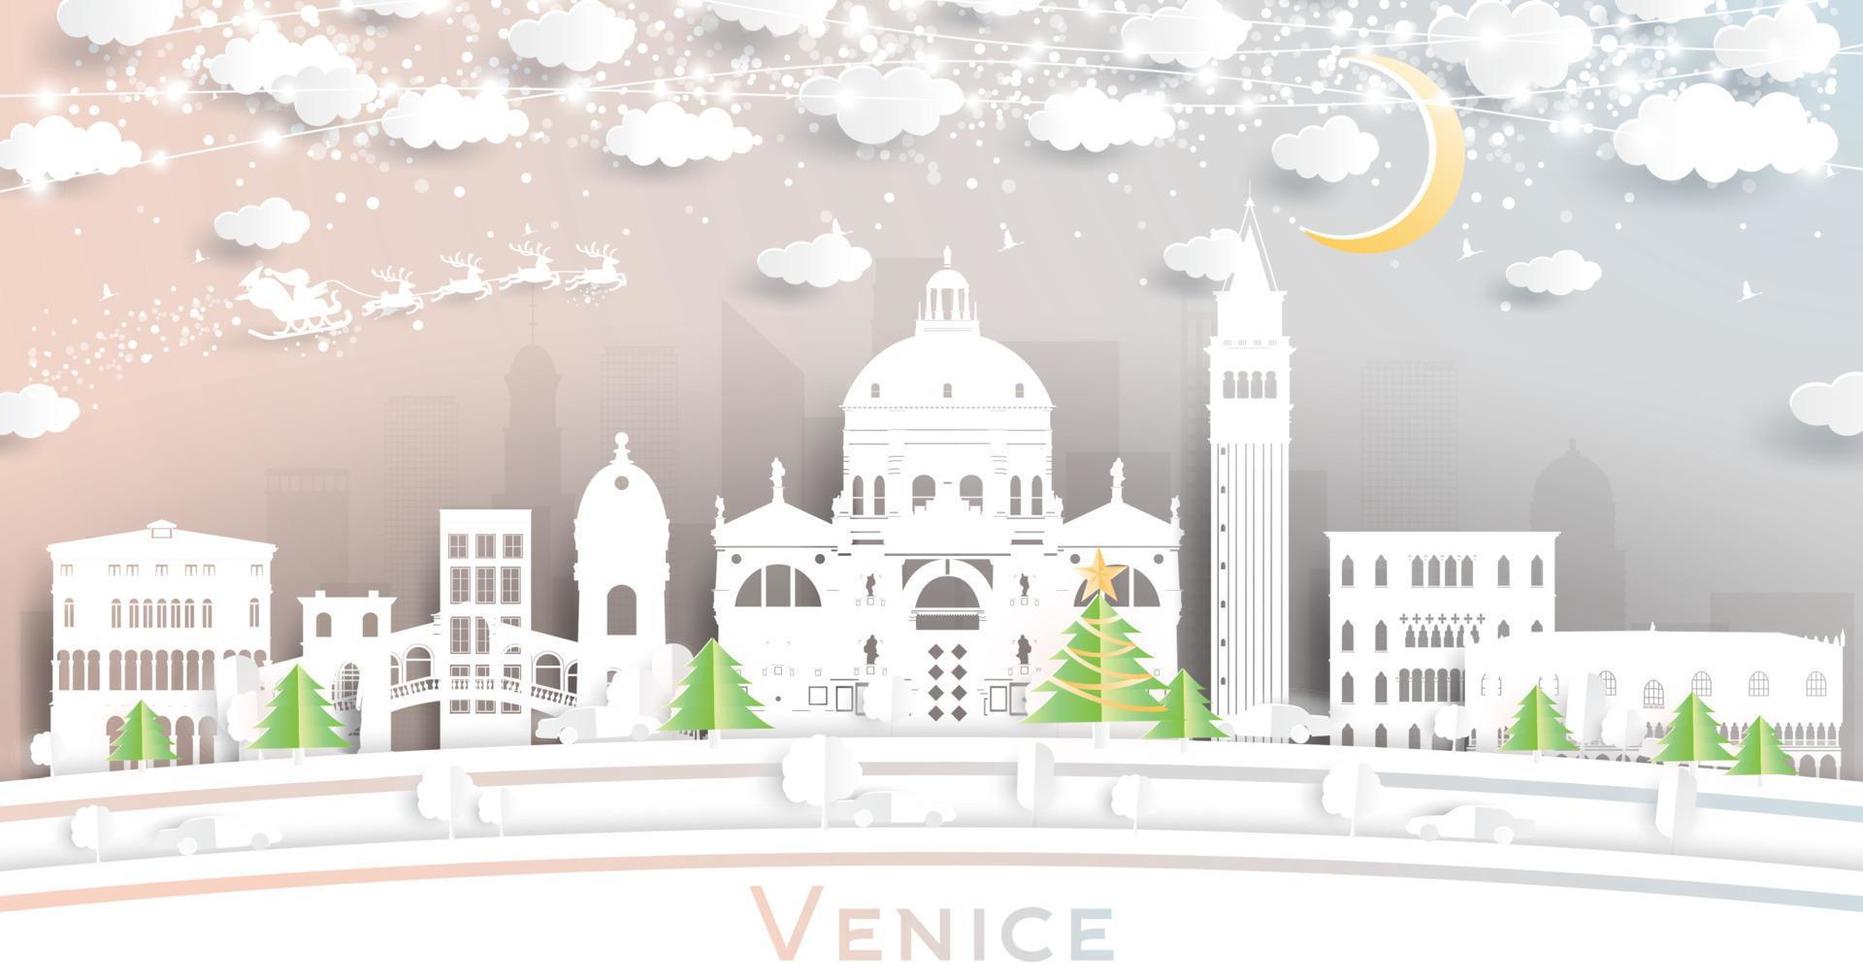 Venice Italy City Skyline in Paper Cut Style with Snowflakes, Moon and Neon Garland. vector